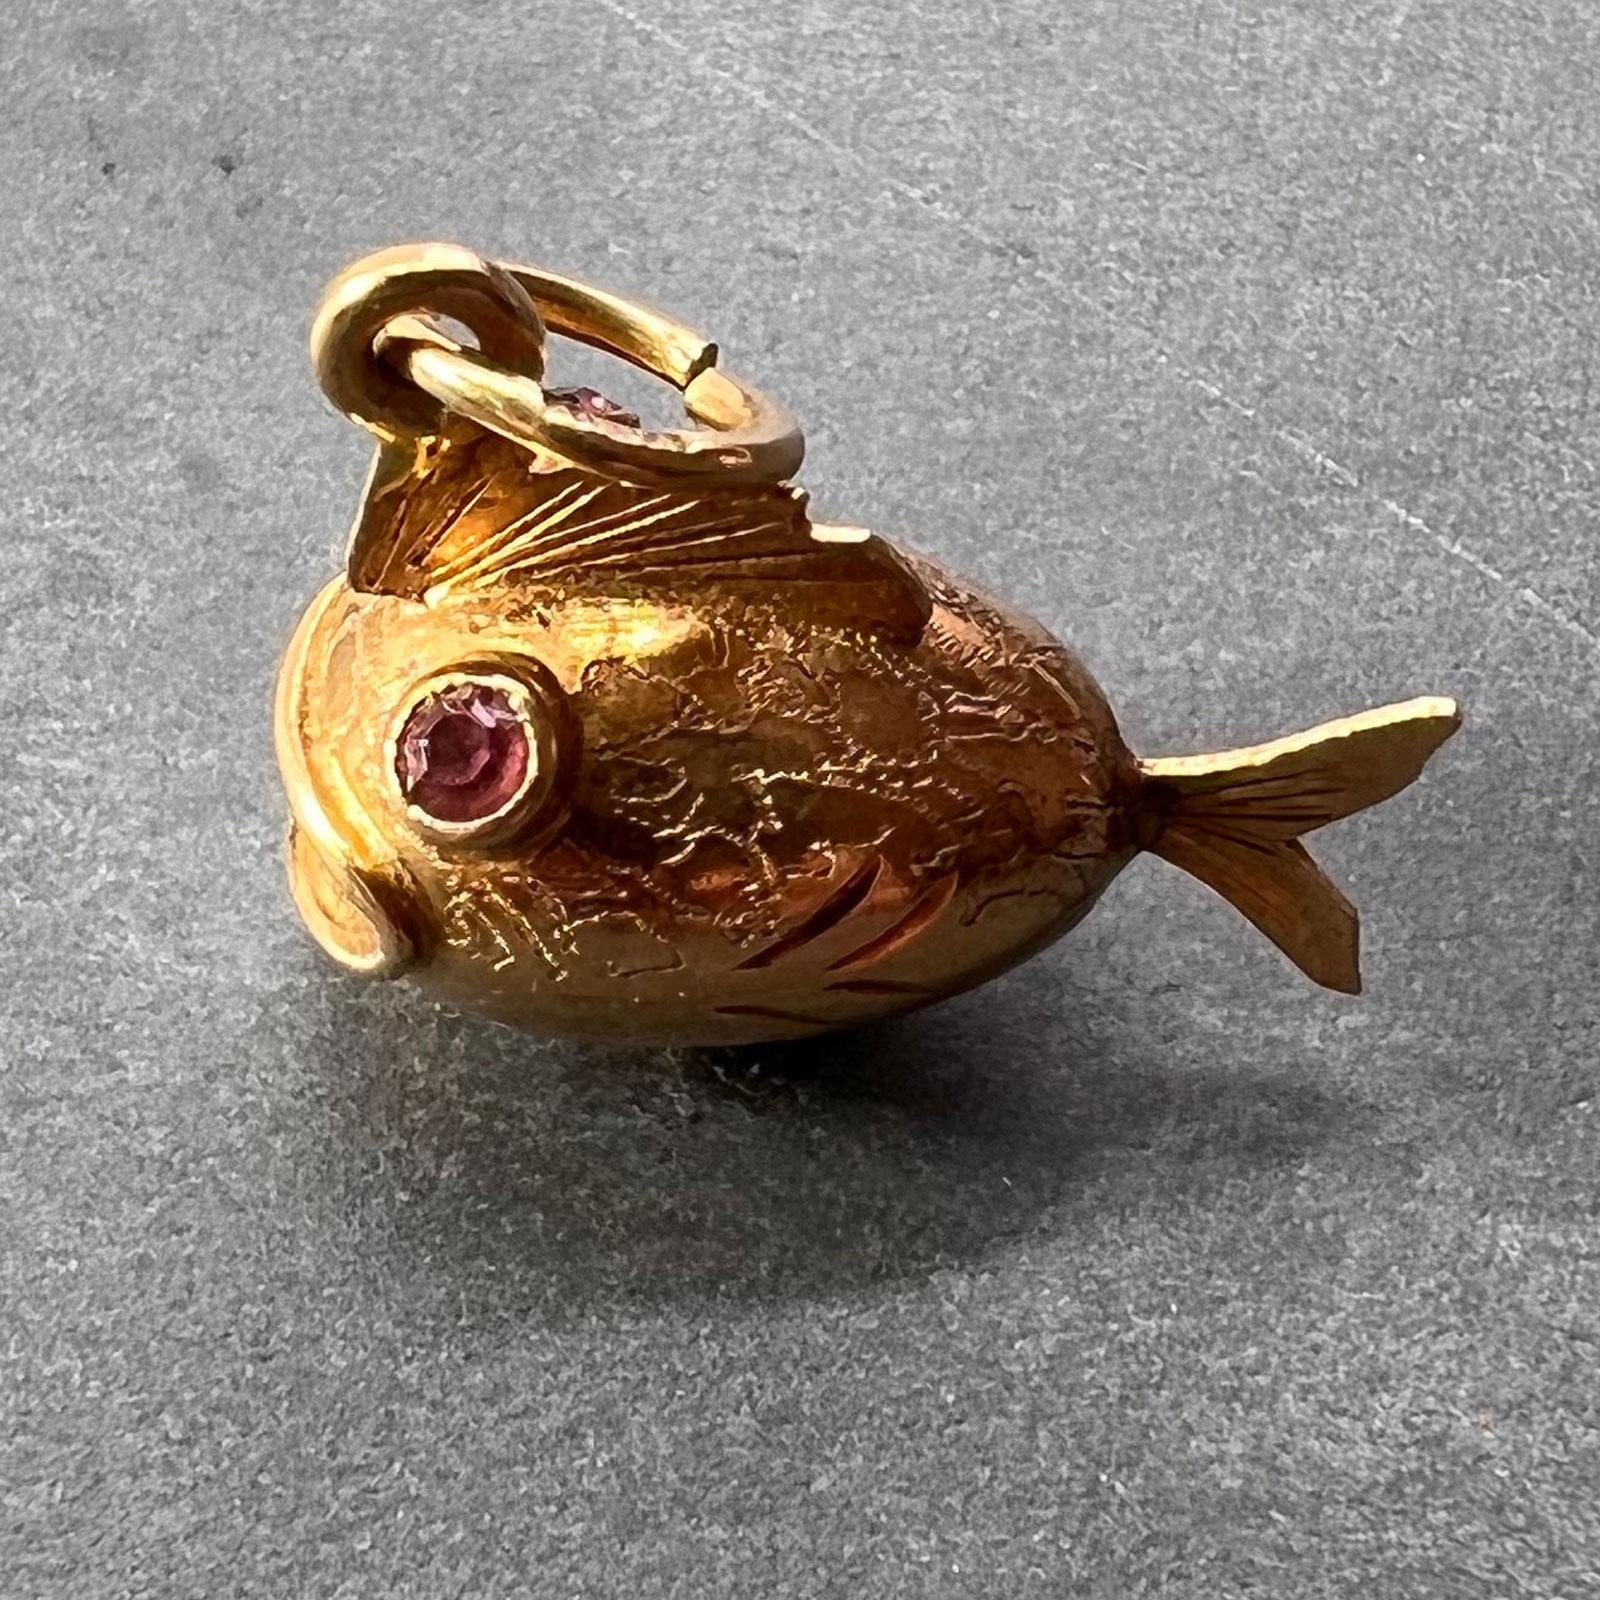 An 18 karat (18K) yellow gold charm pendant designed as a fish with pink paste eyes. Stamped 750 for 18 karat gold and 10VA for Italian manufacture to the jump ring.

Dimensions: 1.8 x 1.5 x 0.95 cm (not including jump ring)
Weight: 2.07 grams